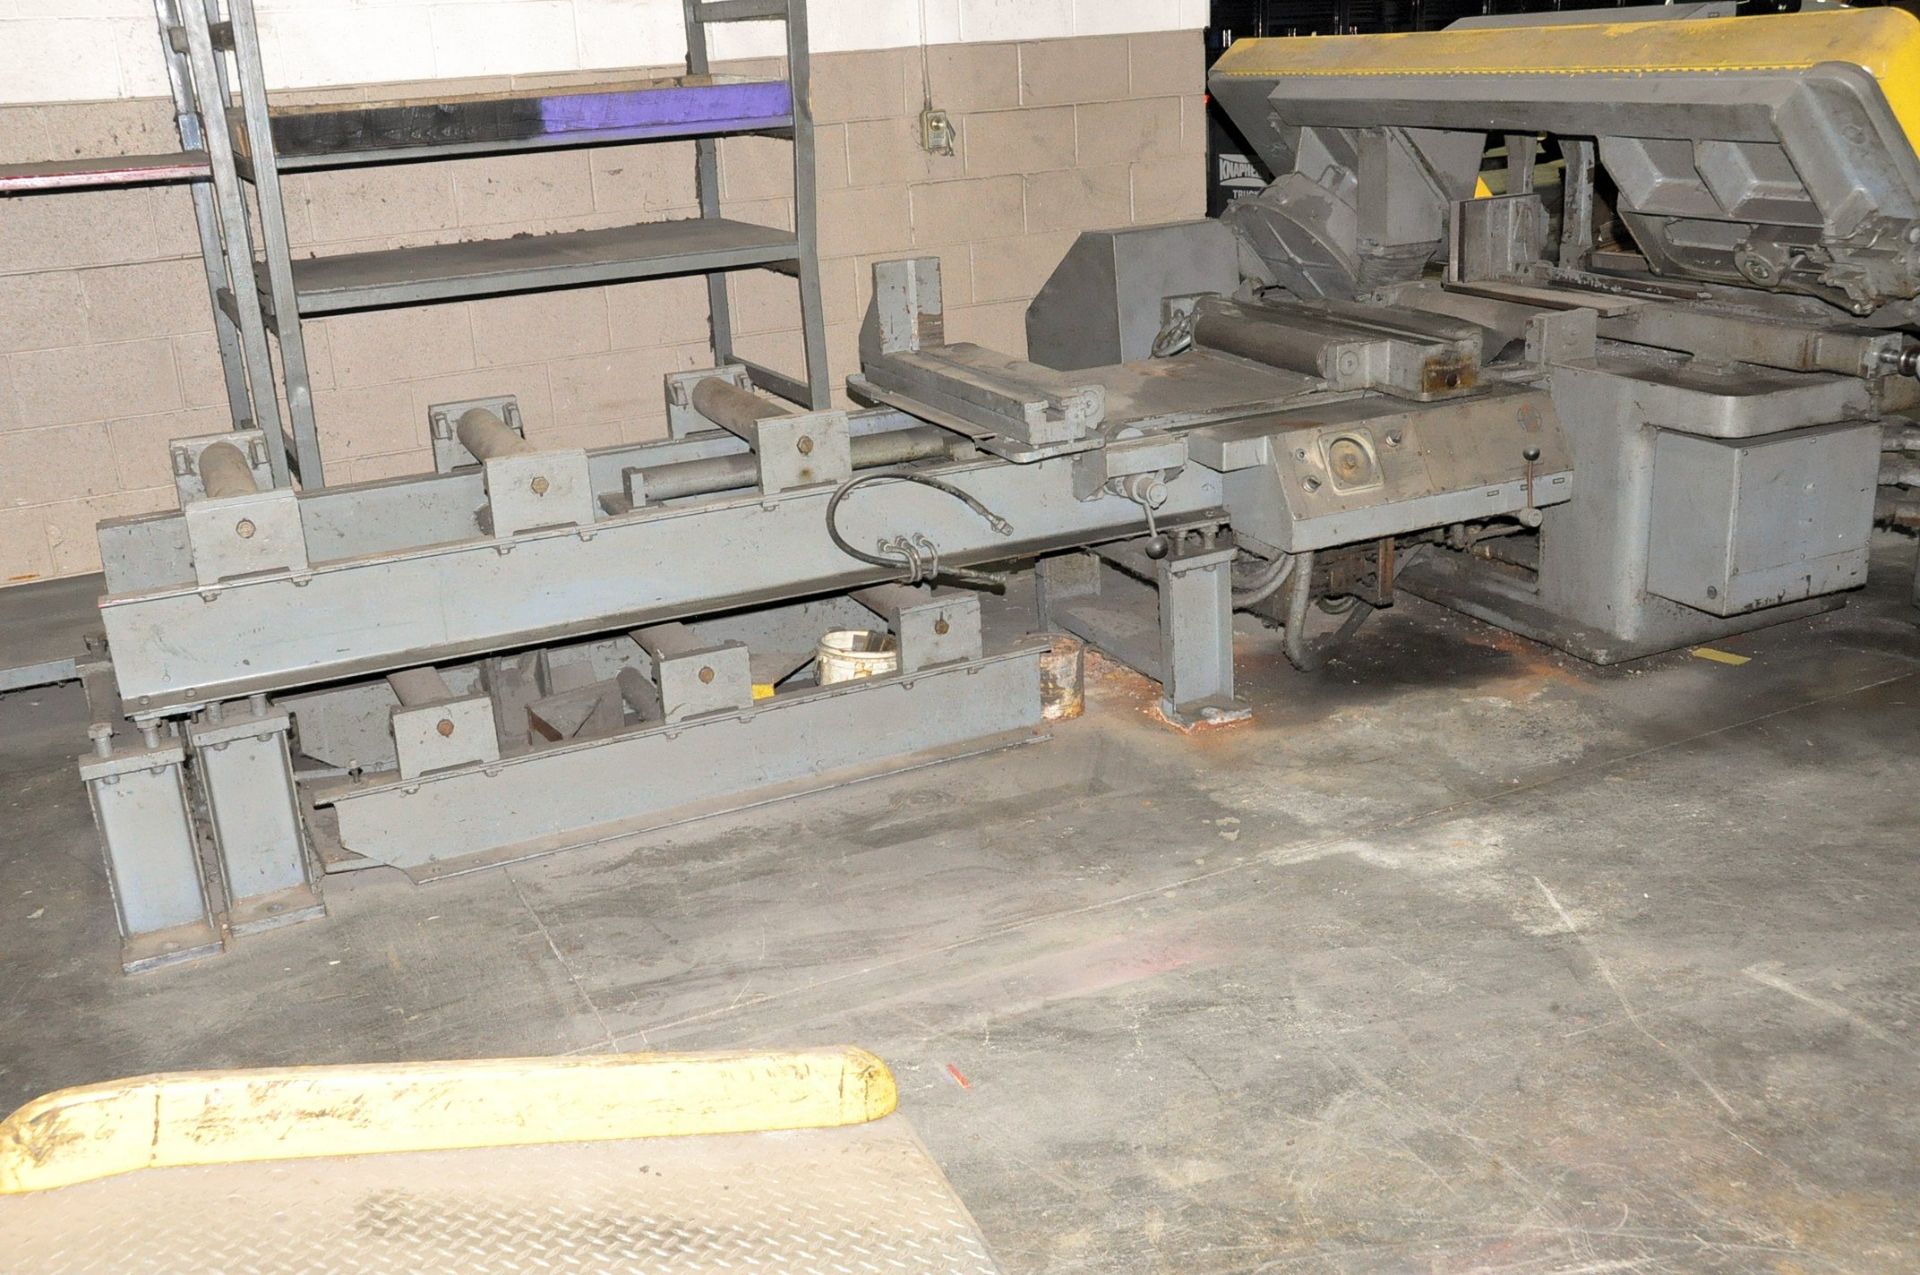 ARMSTRONG BLUM MARVEL 15A4-M1, Horizontal Metal Cutting Band Saw, S/n E 15999, 15" x 20" Capacity, - Image 2 of 2